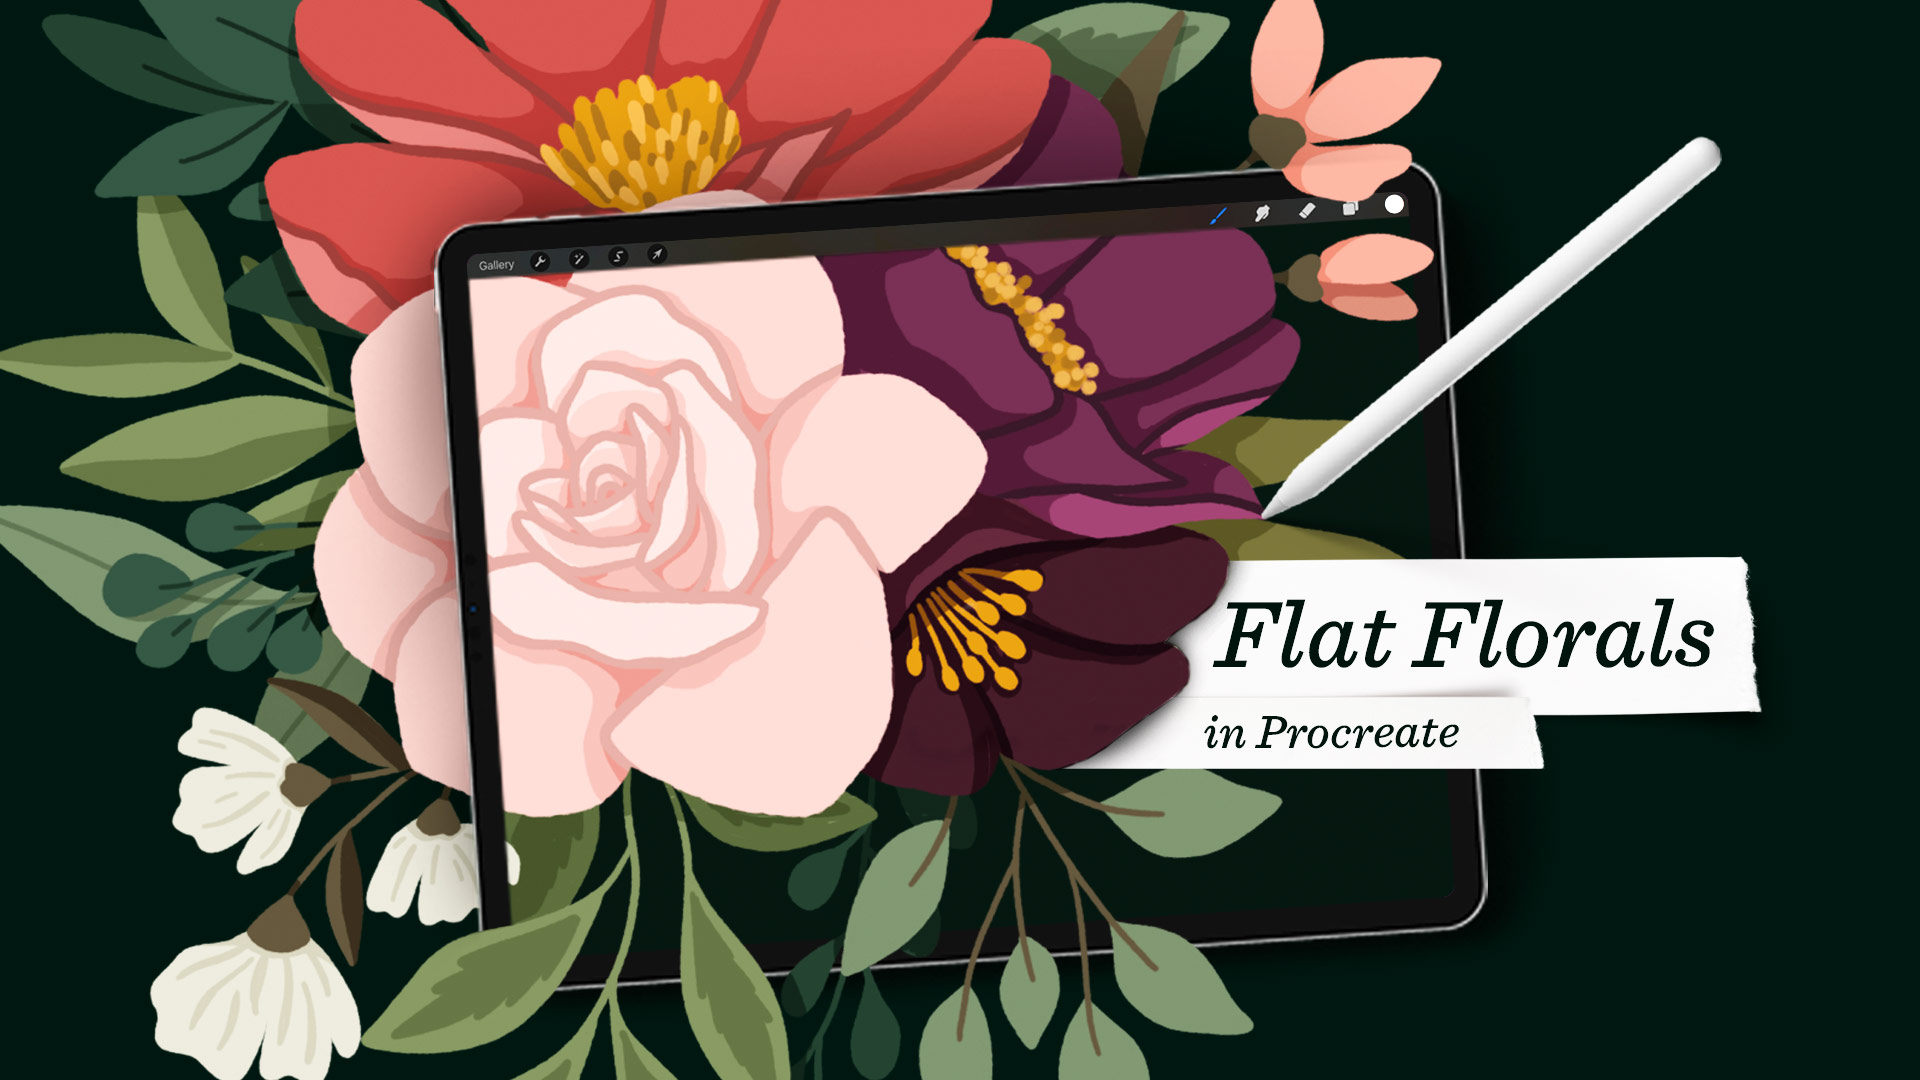 Flat florals in procreate course image